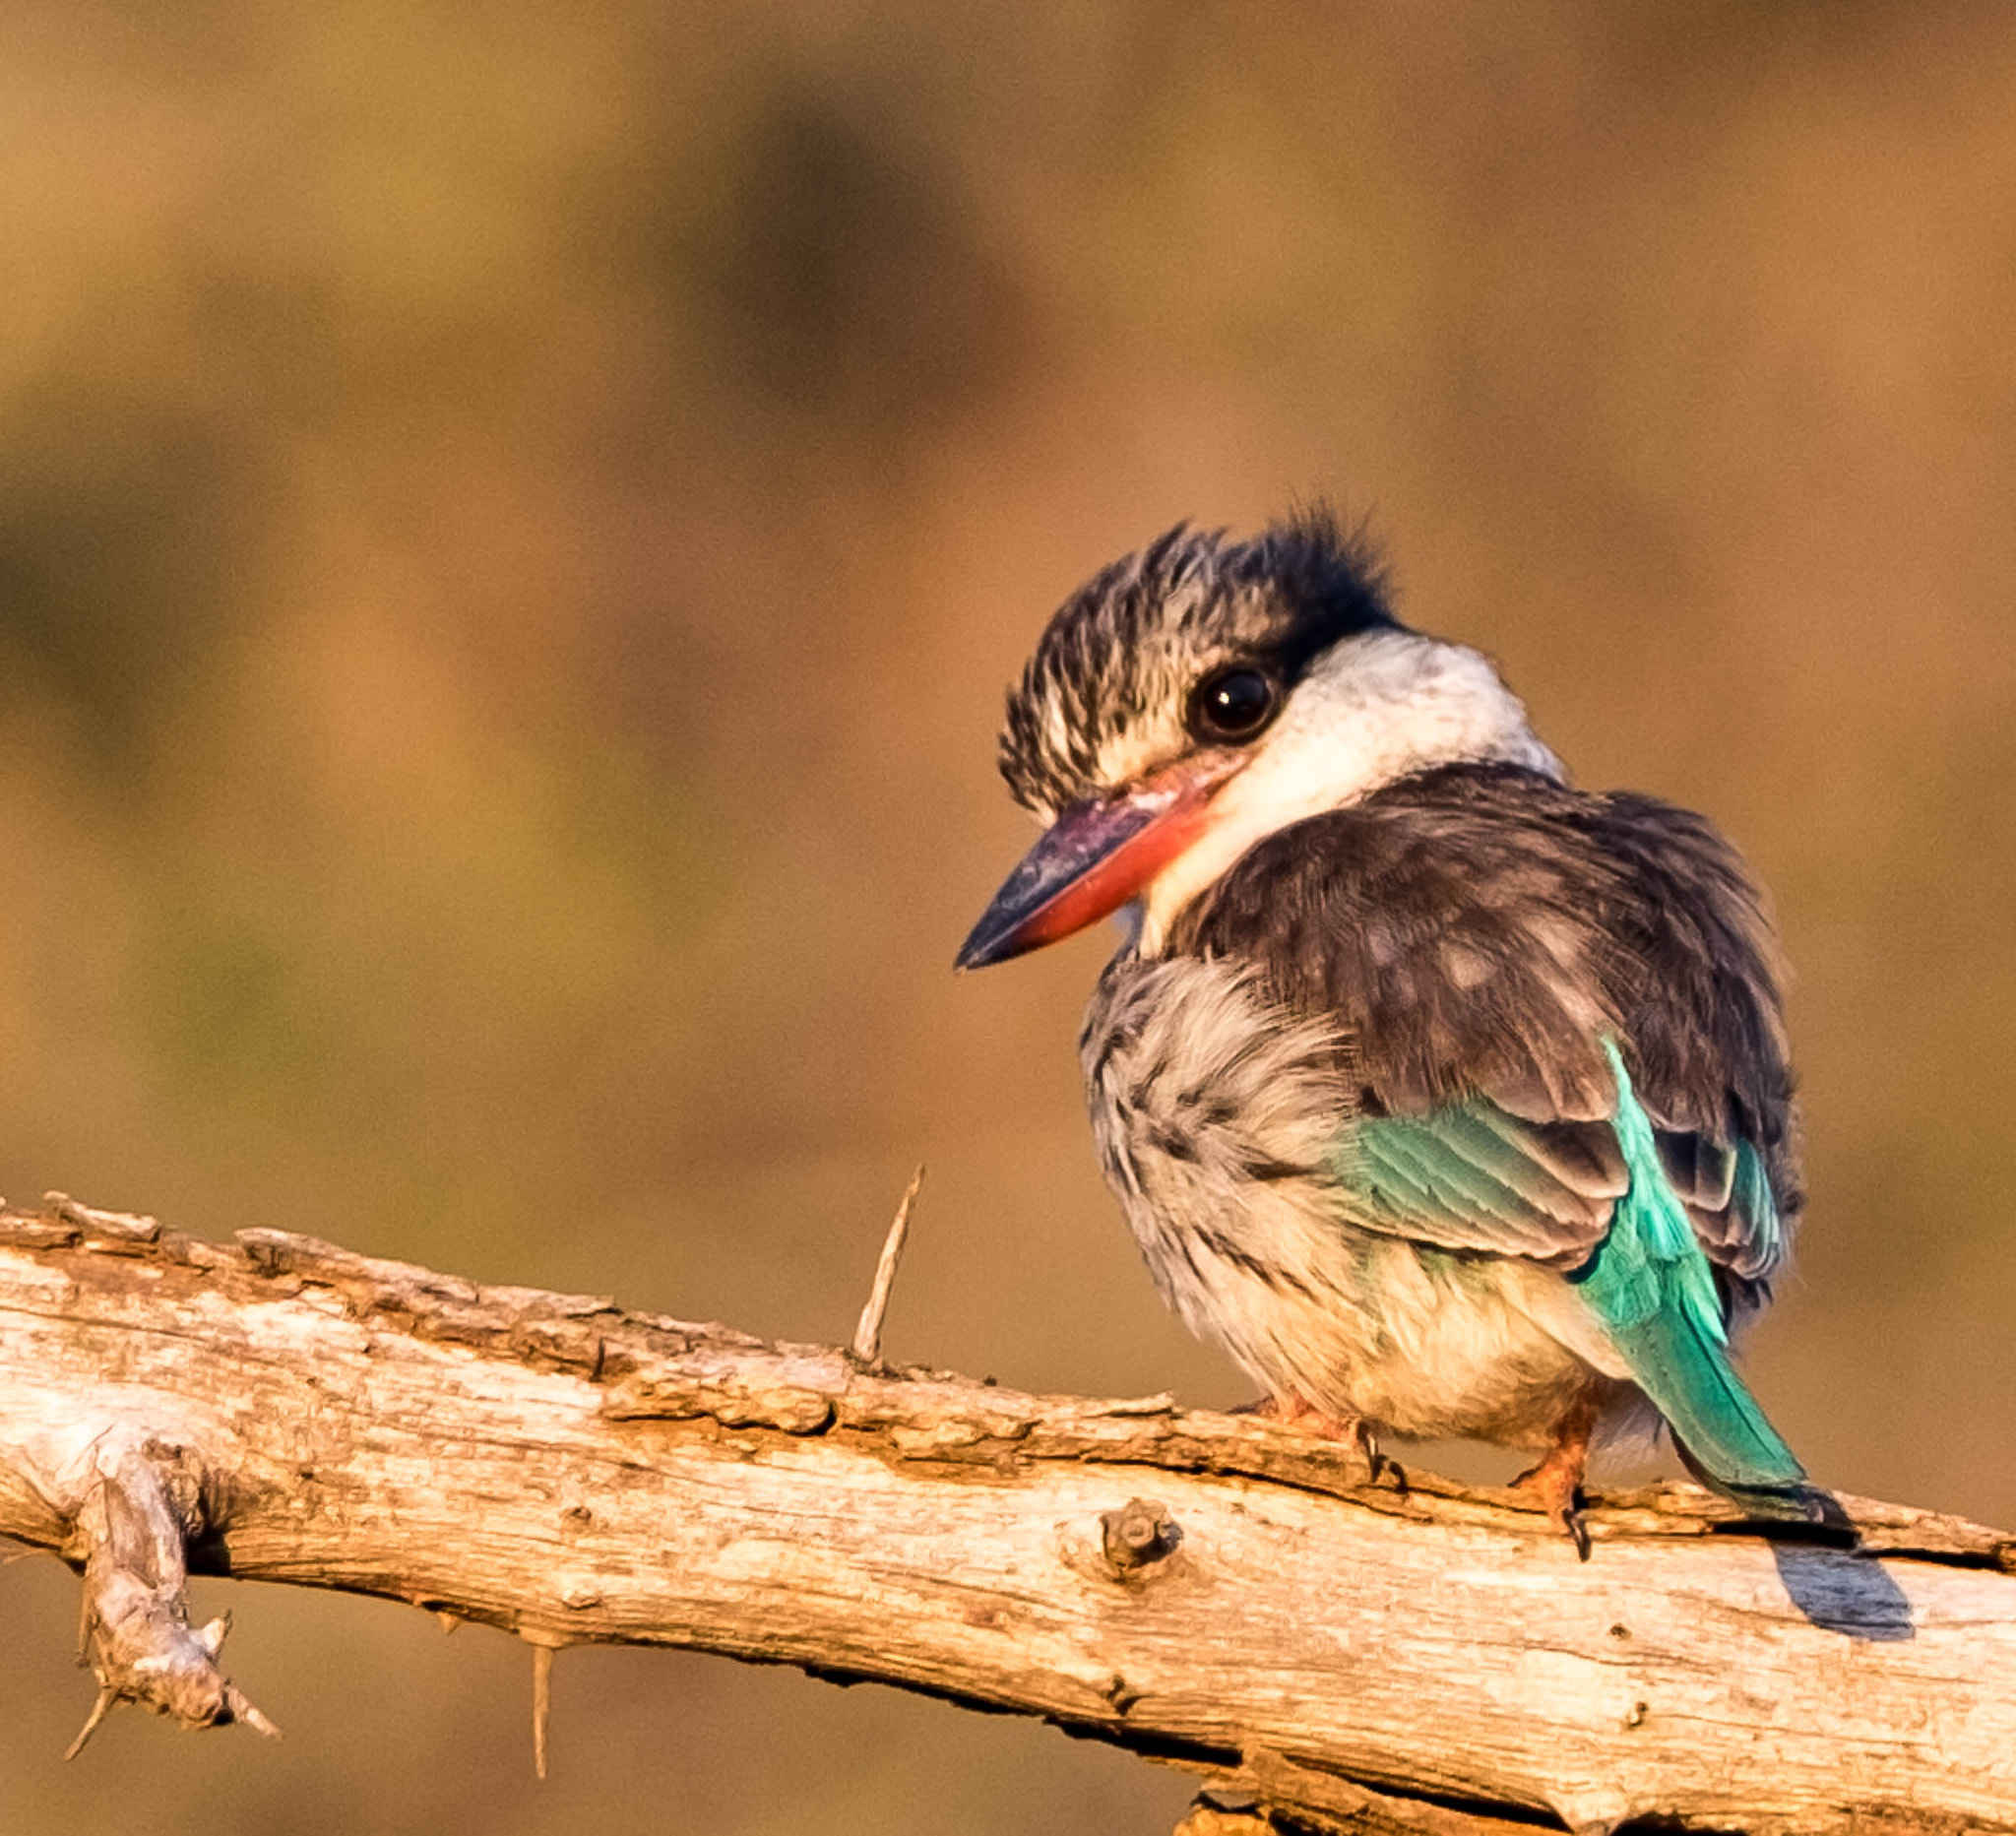 XF50-140mmF2.8 R LM OIS WR + 2x sample photo. Juvenile brown-hooded kingfisher photography